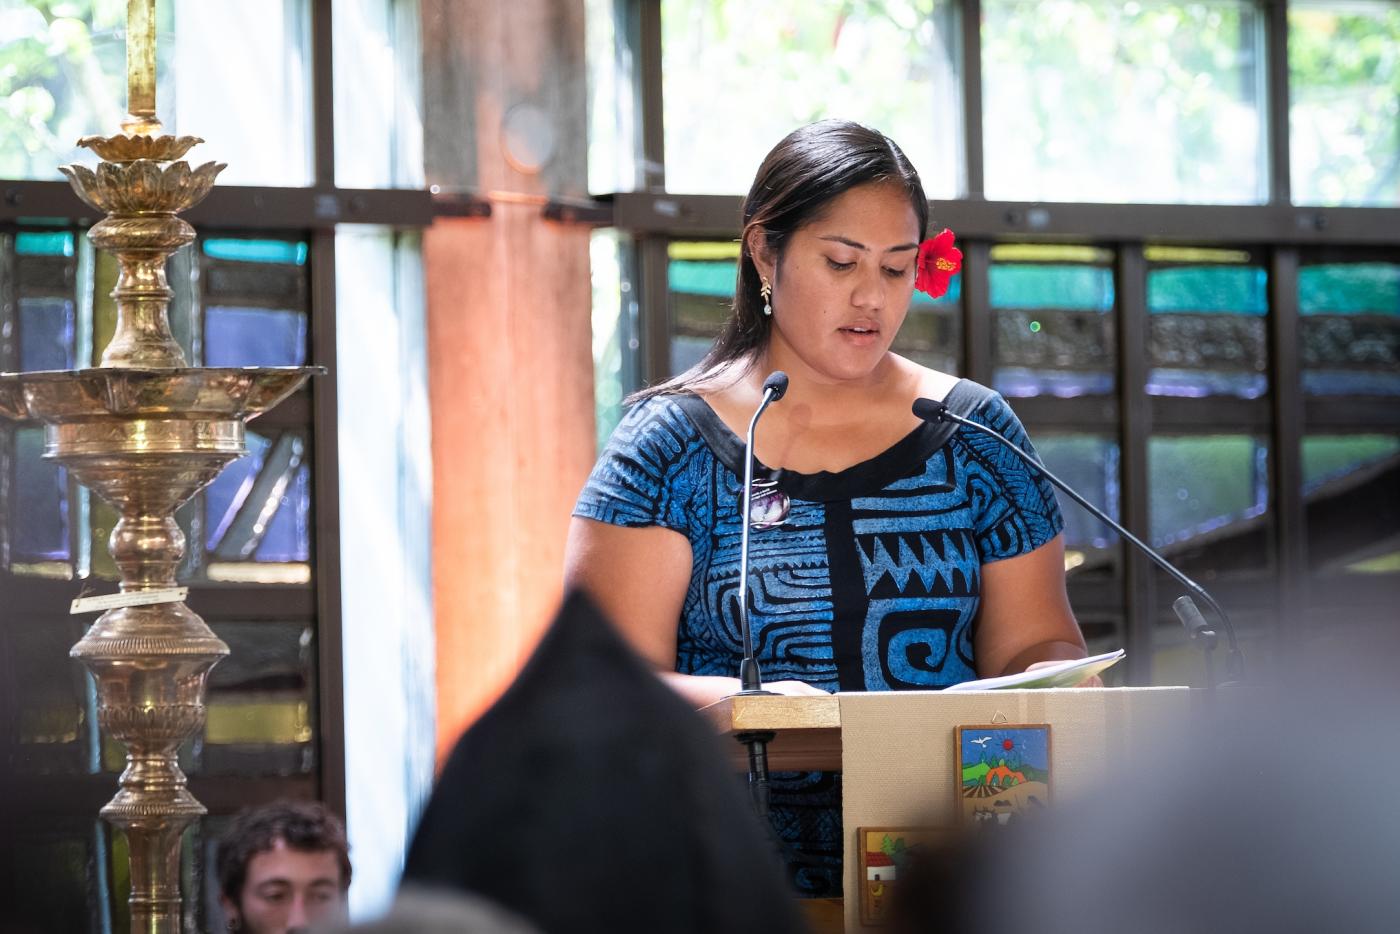 Toai Metanoia Tumaai-Vuaali, one of the young people selected to read and pray with the Pope Francis and WCC leaders during the ecumenical prayer service. Photo: Magnus Aronson/WCC